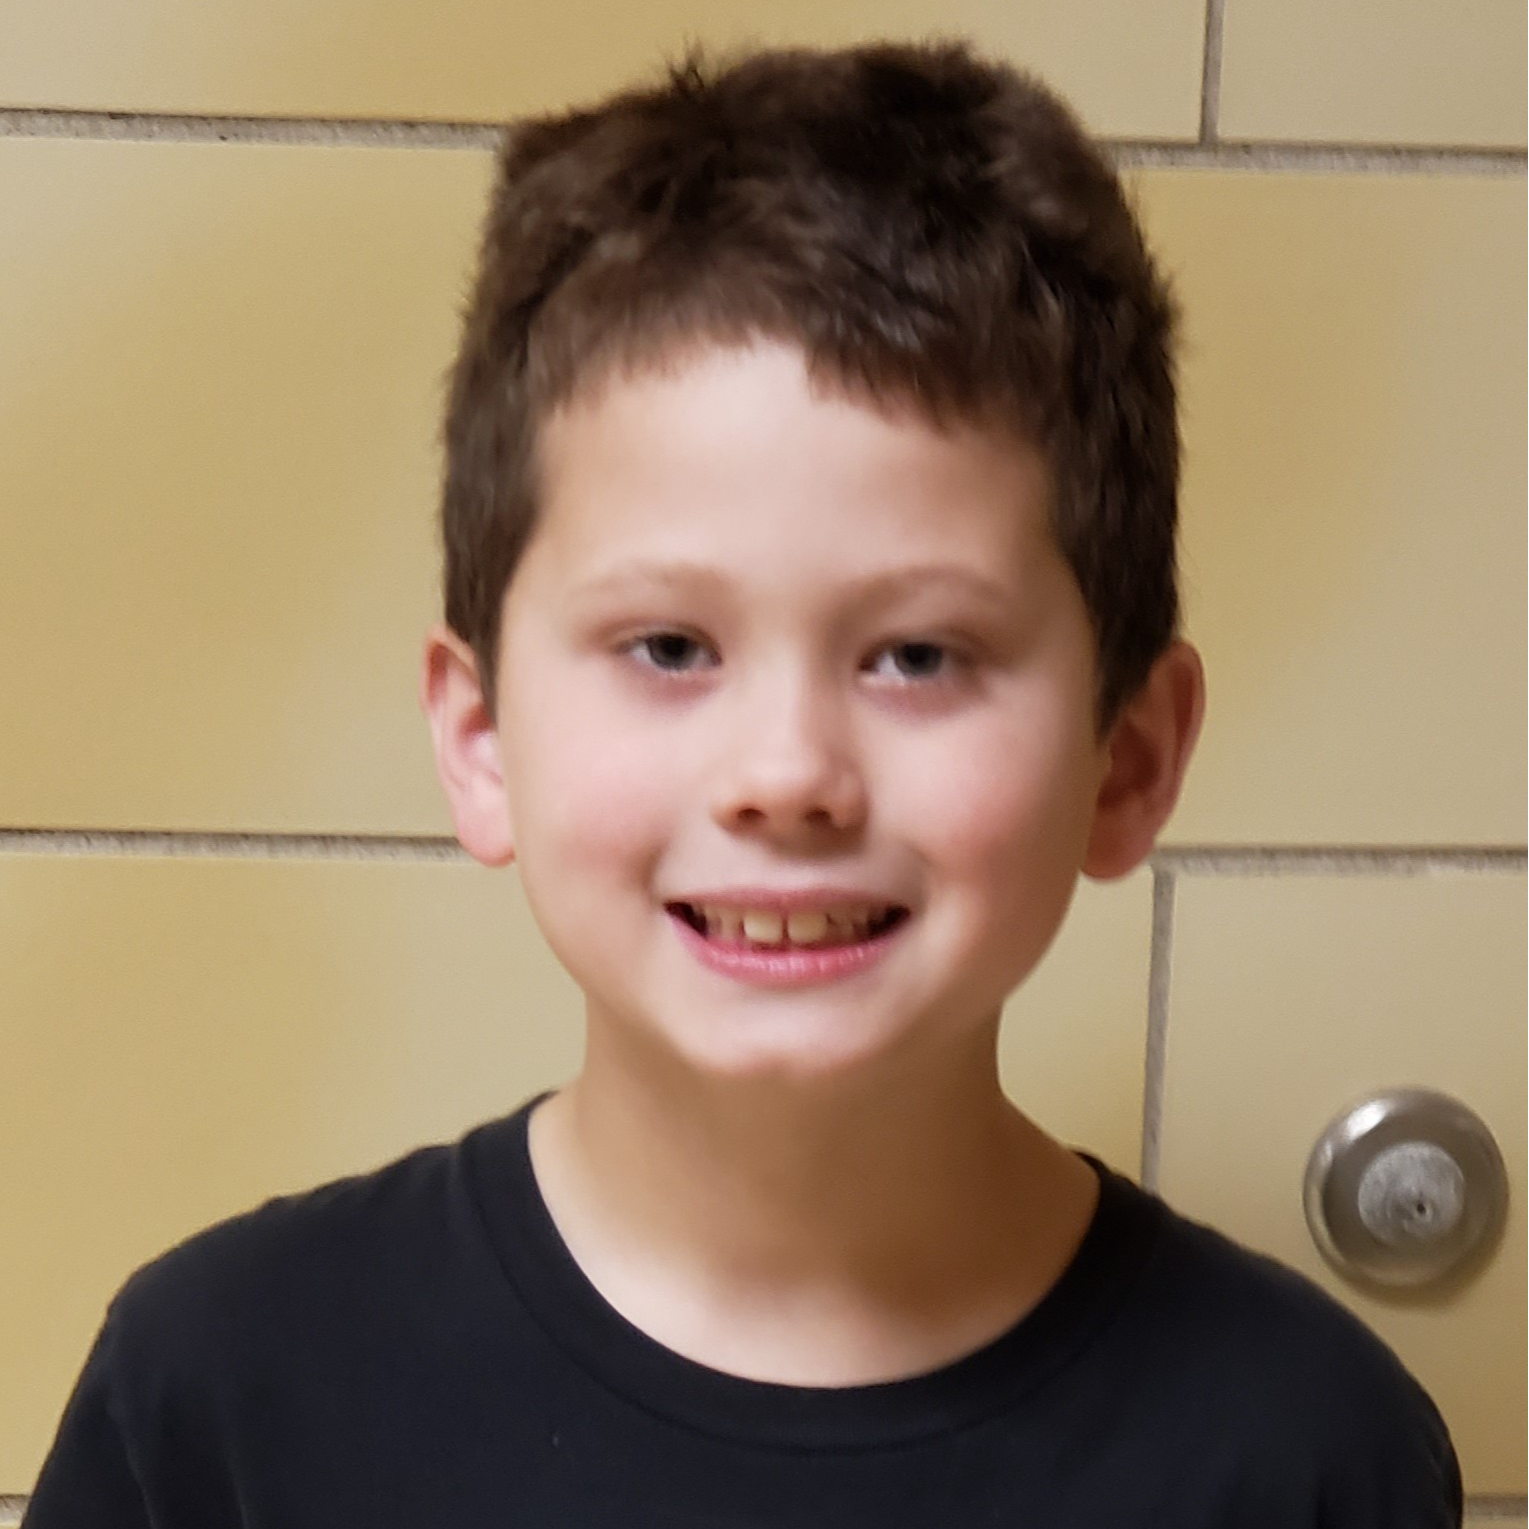 smiling boy with brown hair wearing a black t-shirt